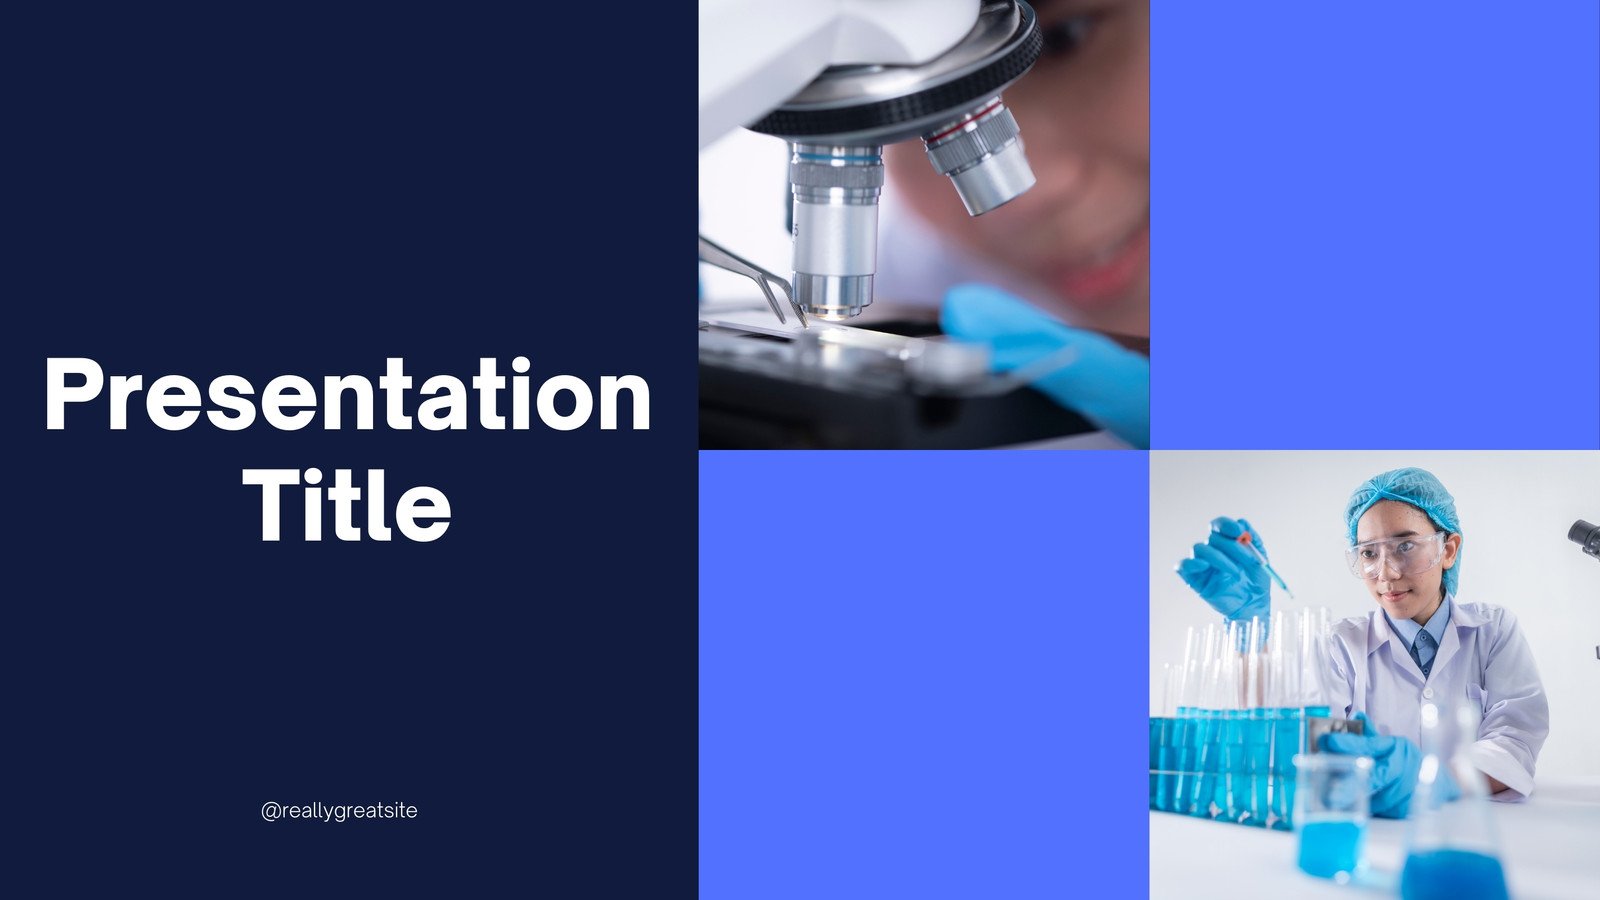 Free and customizable medical presentation templates | Canva